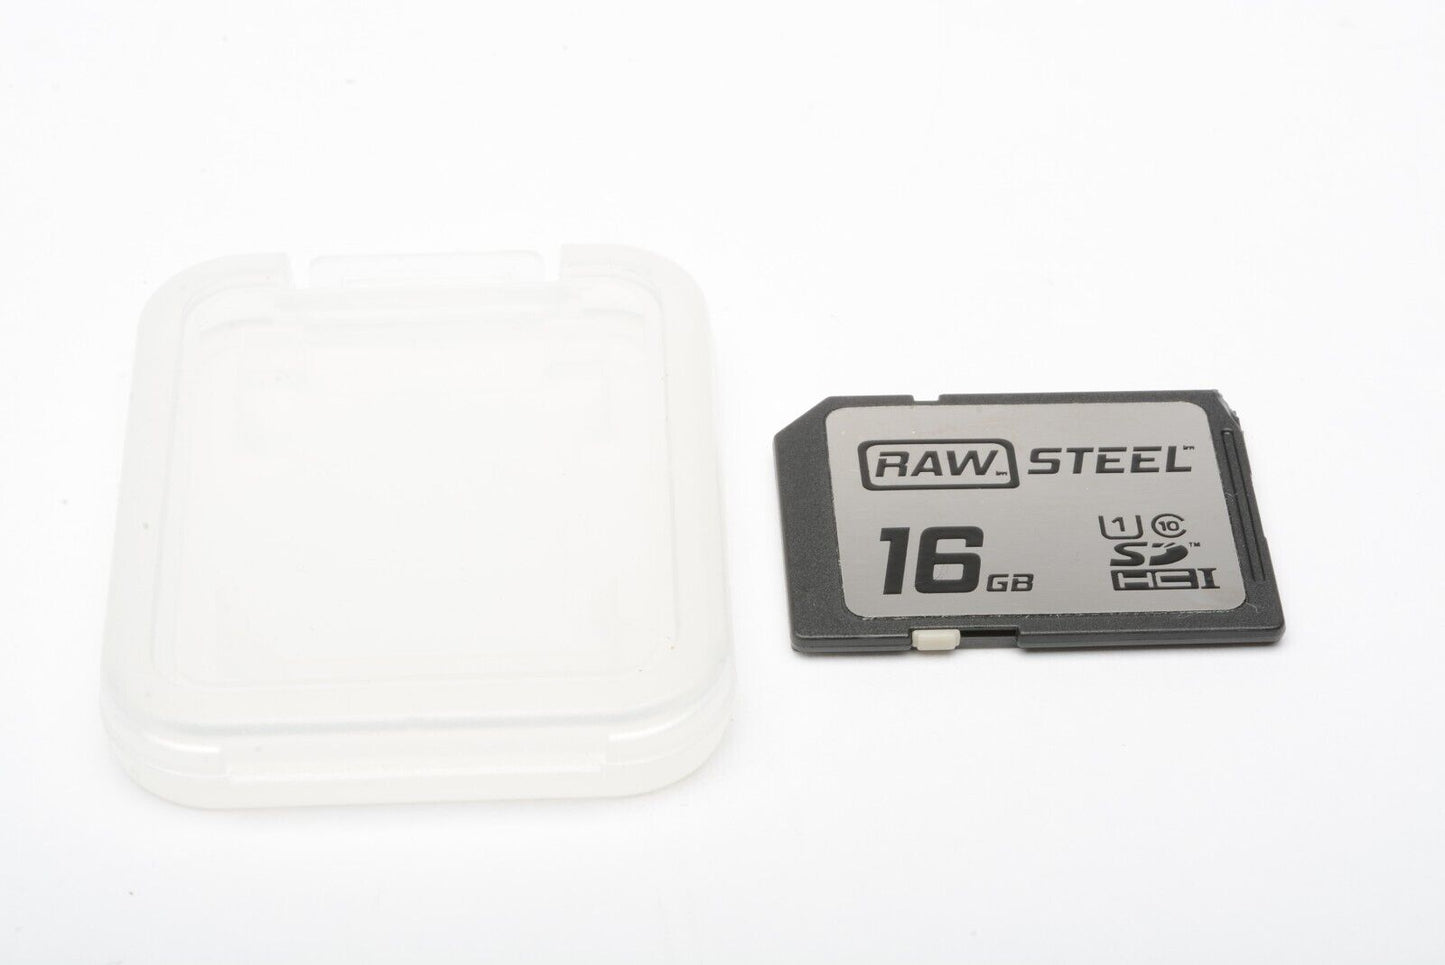 EXC++ RAW STEEL 16GB SD HC I SD CARD IN JEWEL CASE, FORMATTED